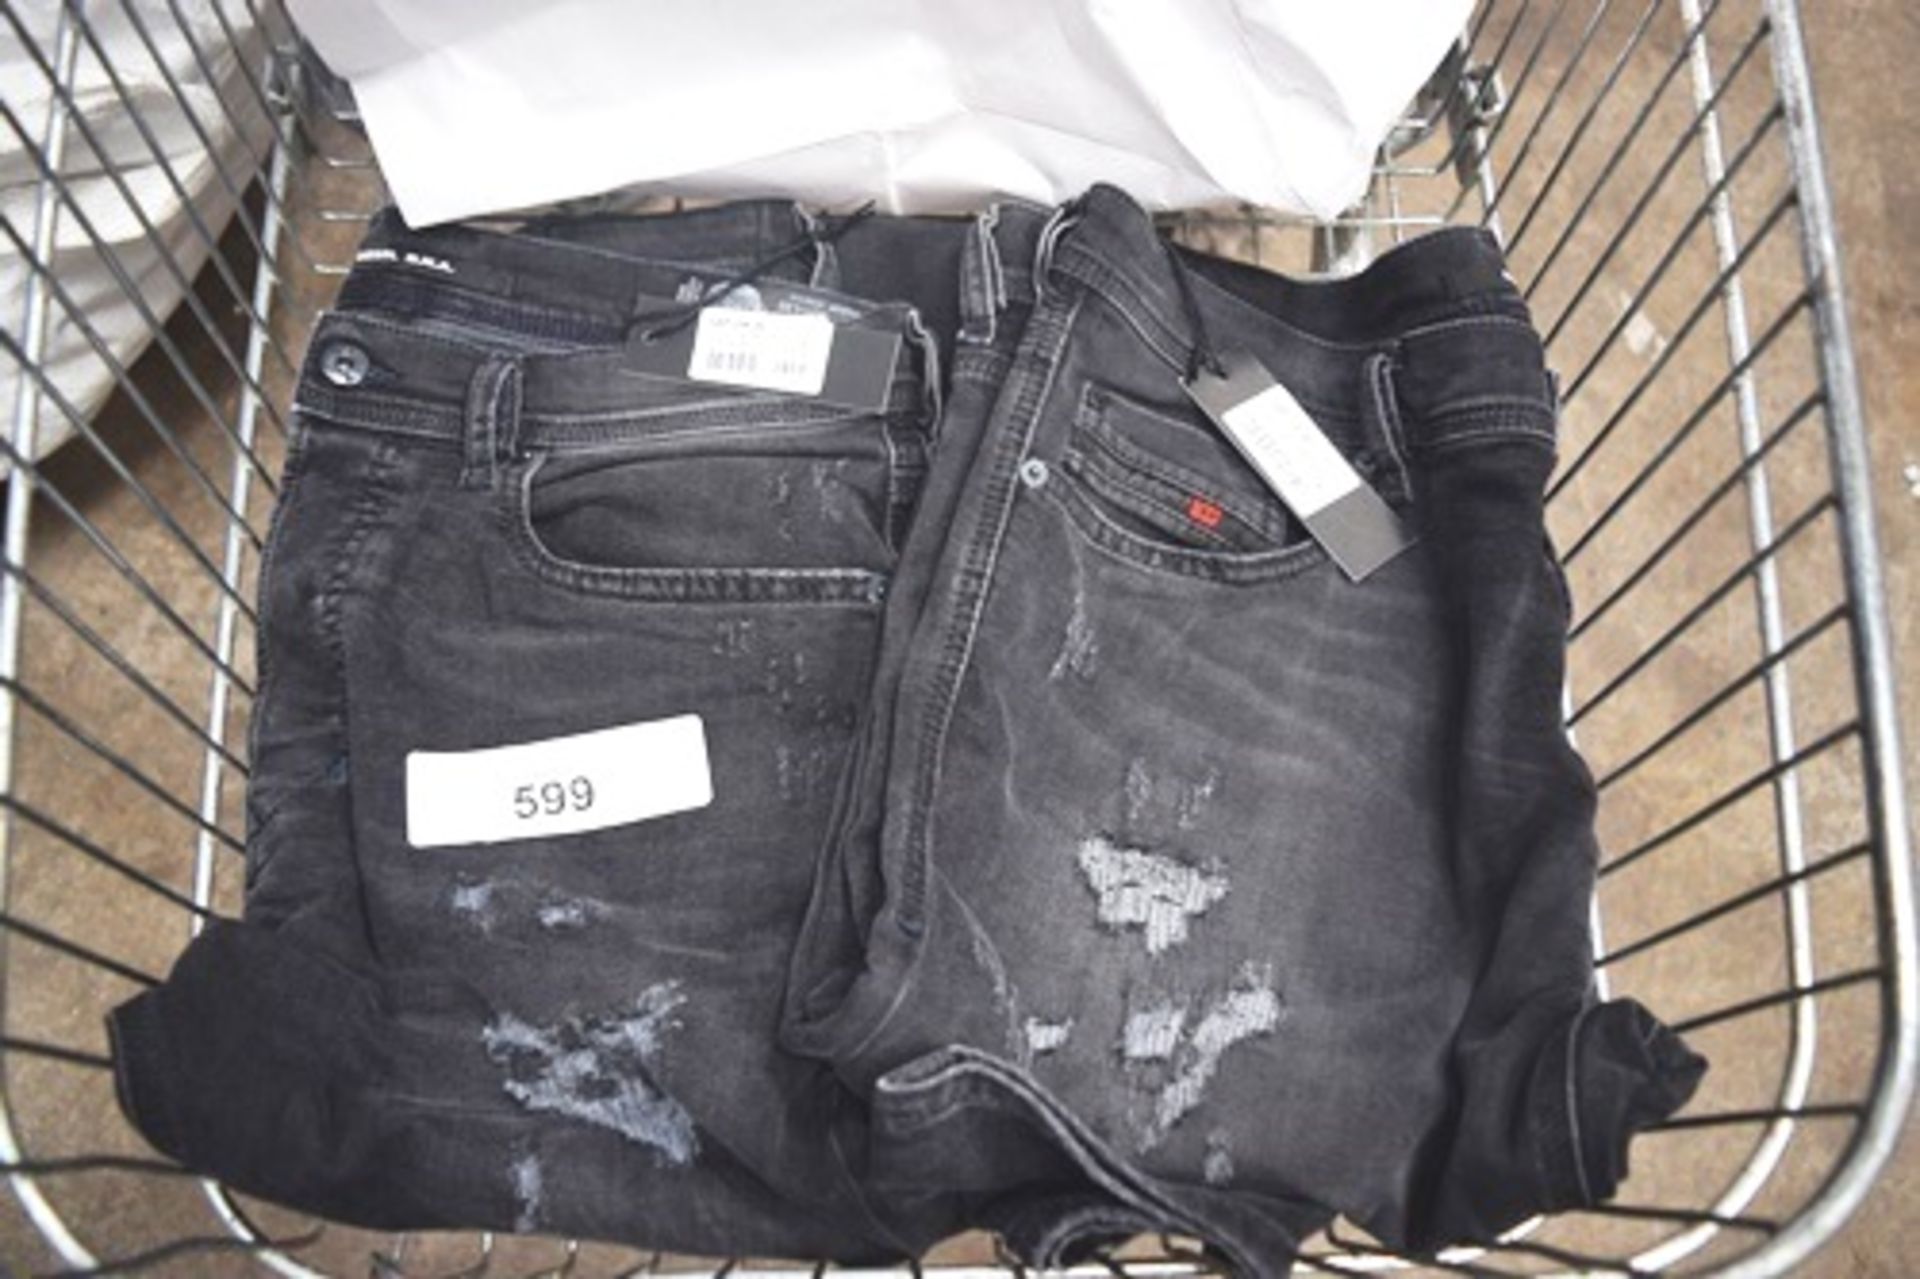 2 x pairs Diesel jeans comprising 1 x Tepphar size W36/L32 and 1 x Tepphar size W31/L32 - New ( - Image 2 of 2